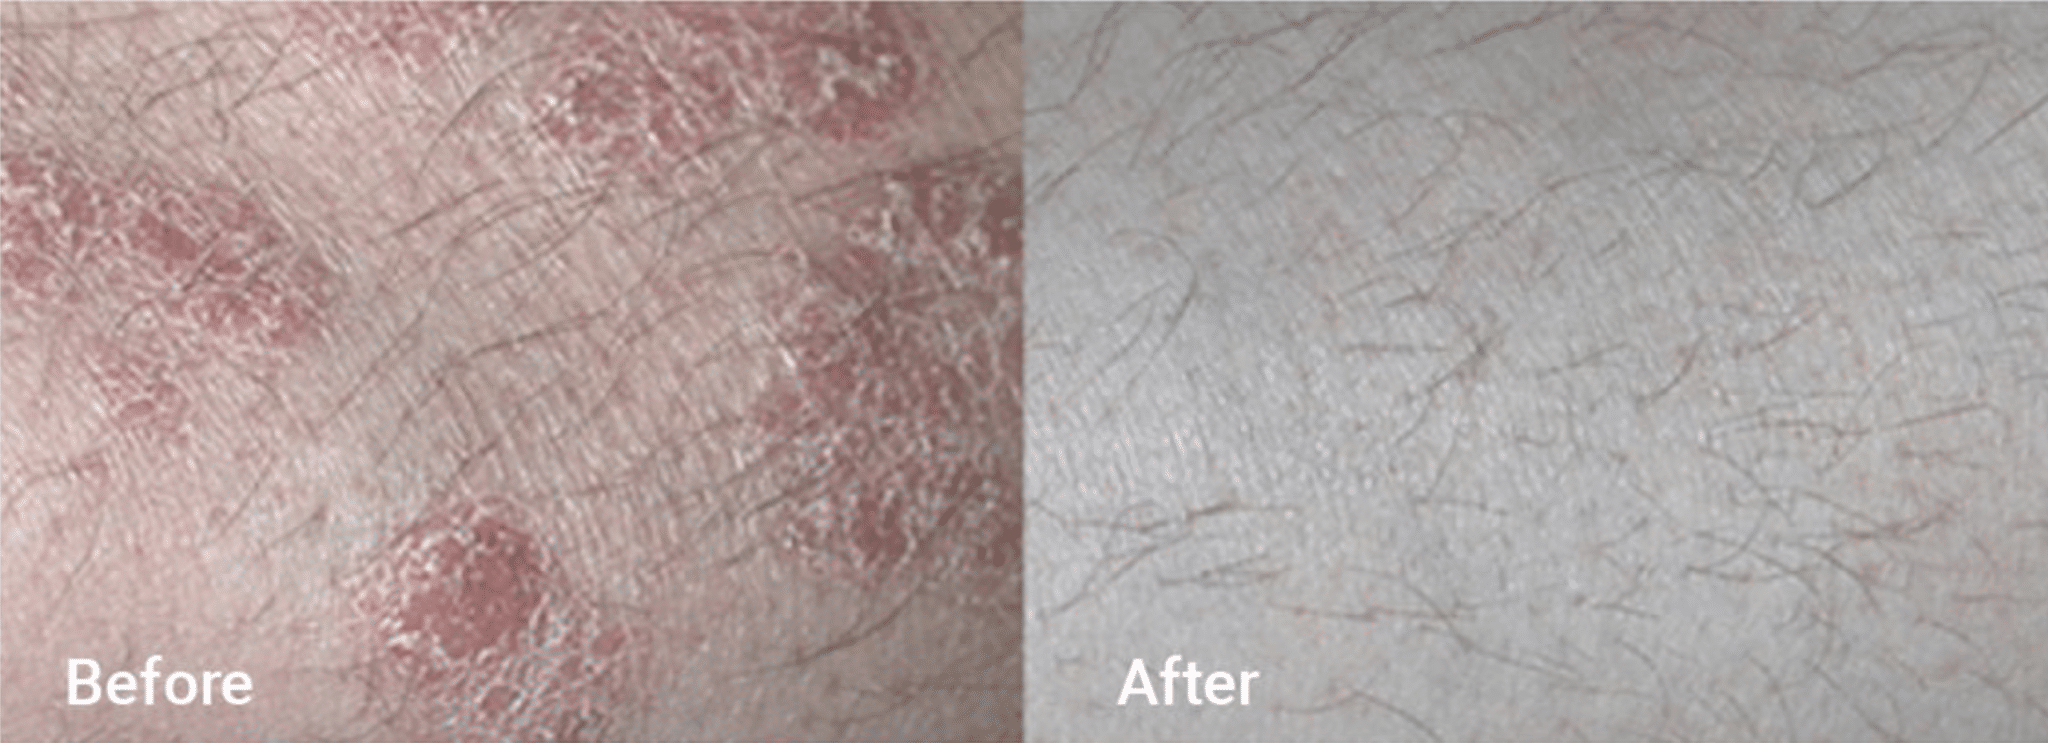 before & after image of psoriasis treatment